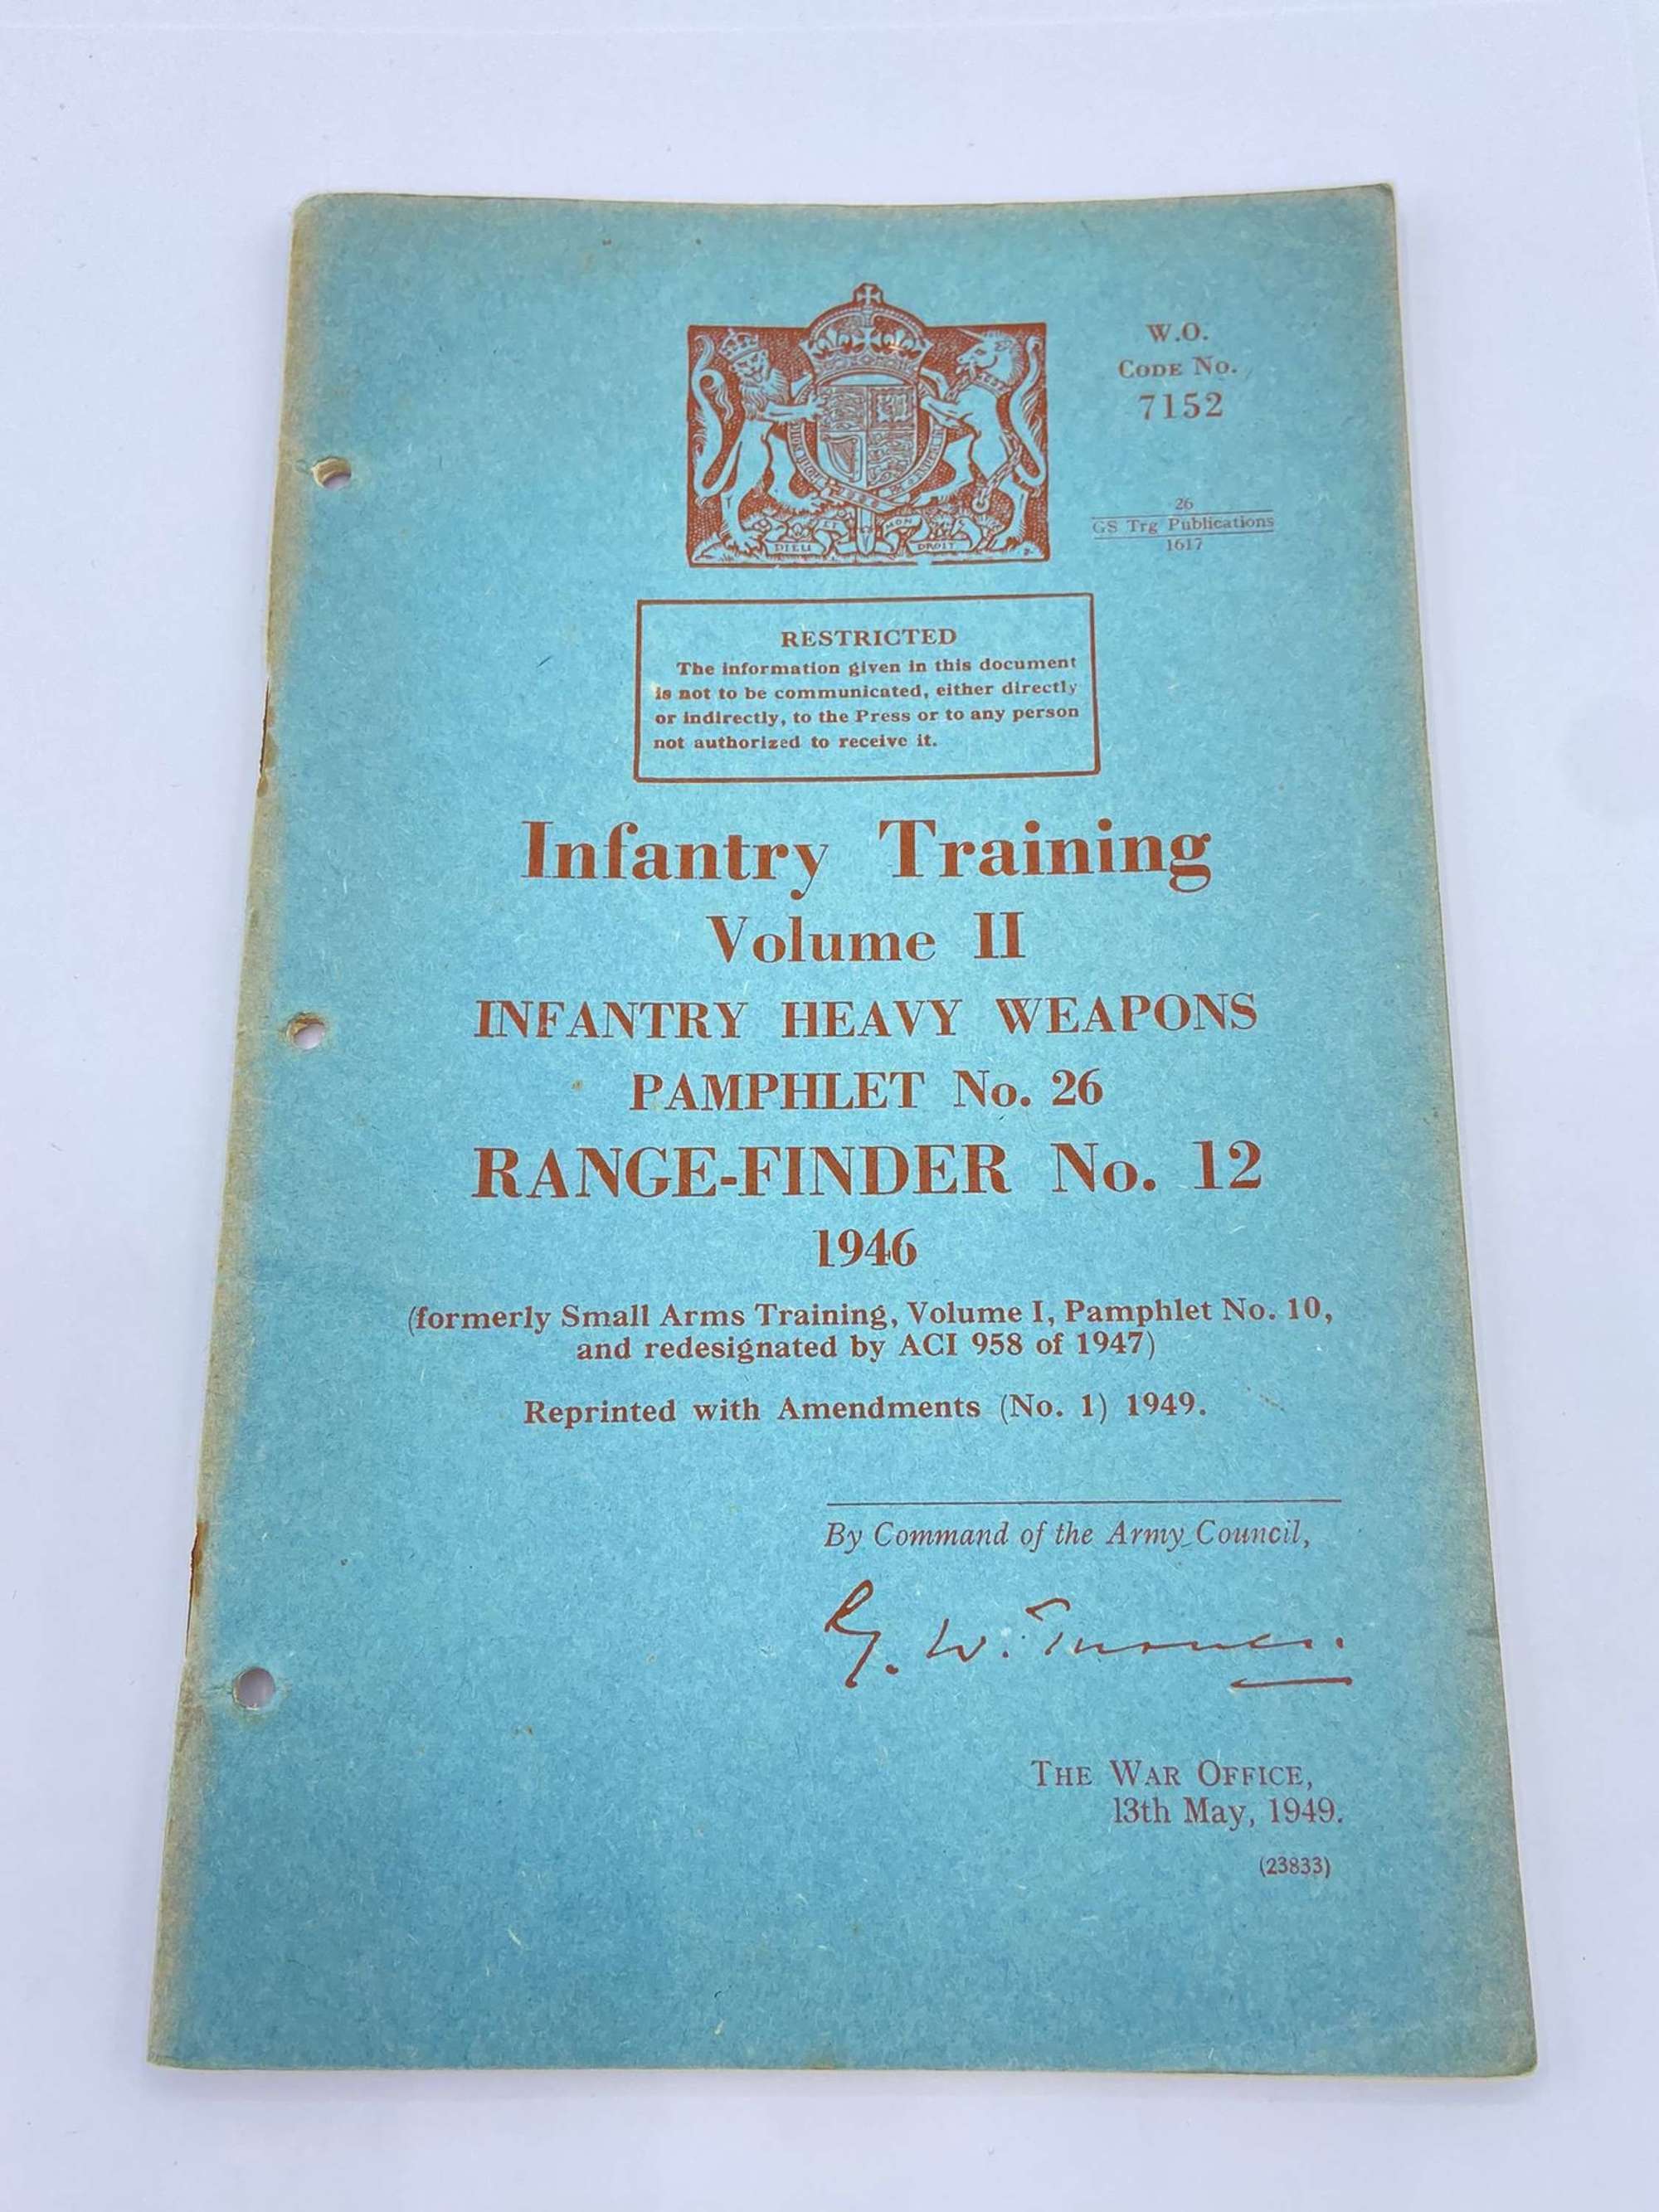 WW2 Infantry Heavy Weapons Training Pamphlet Rangefinder No.12 1946